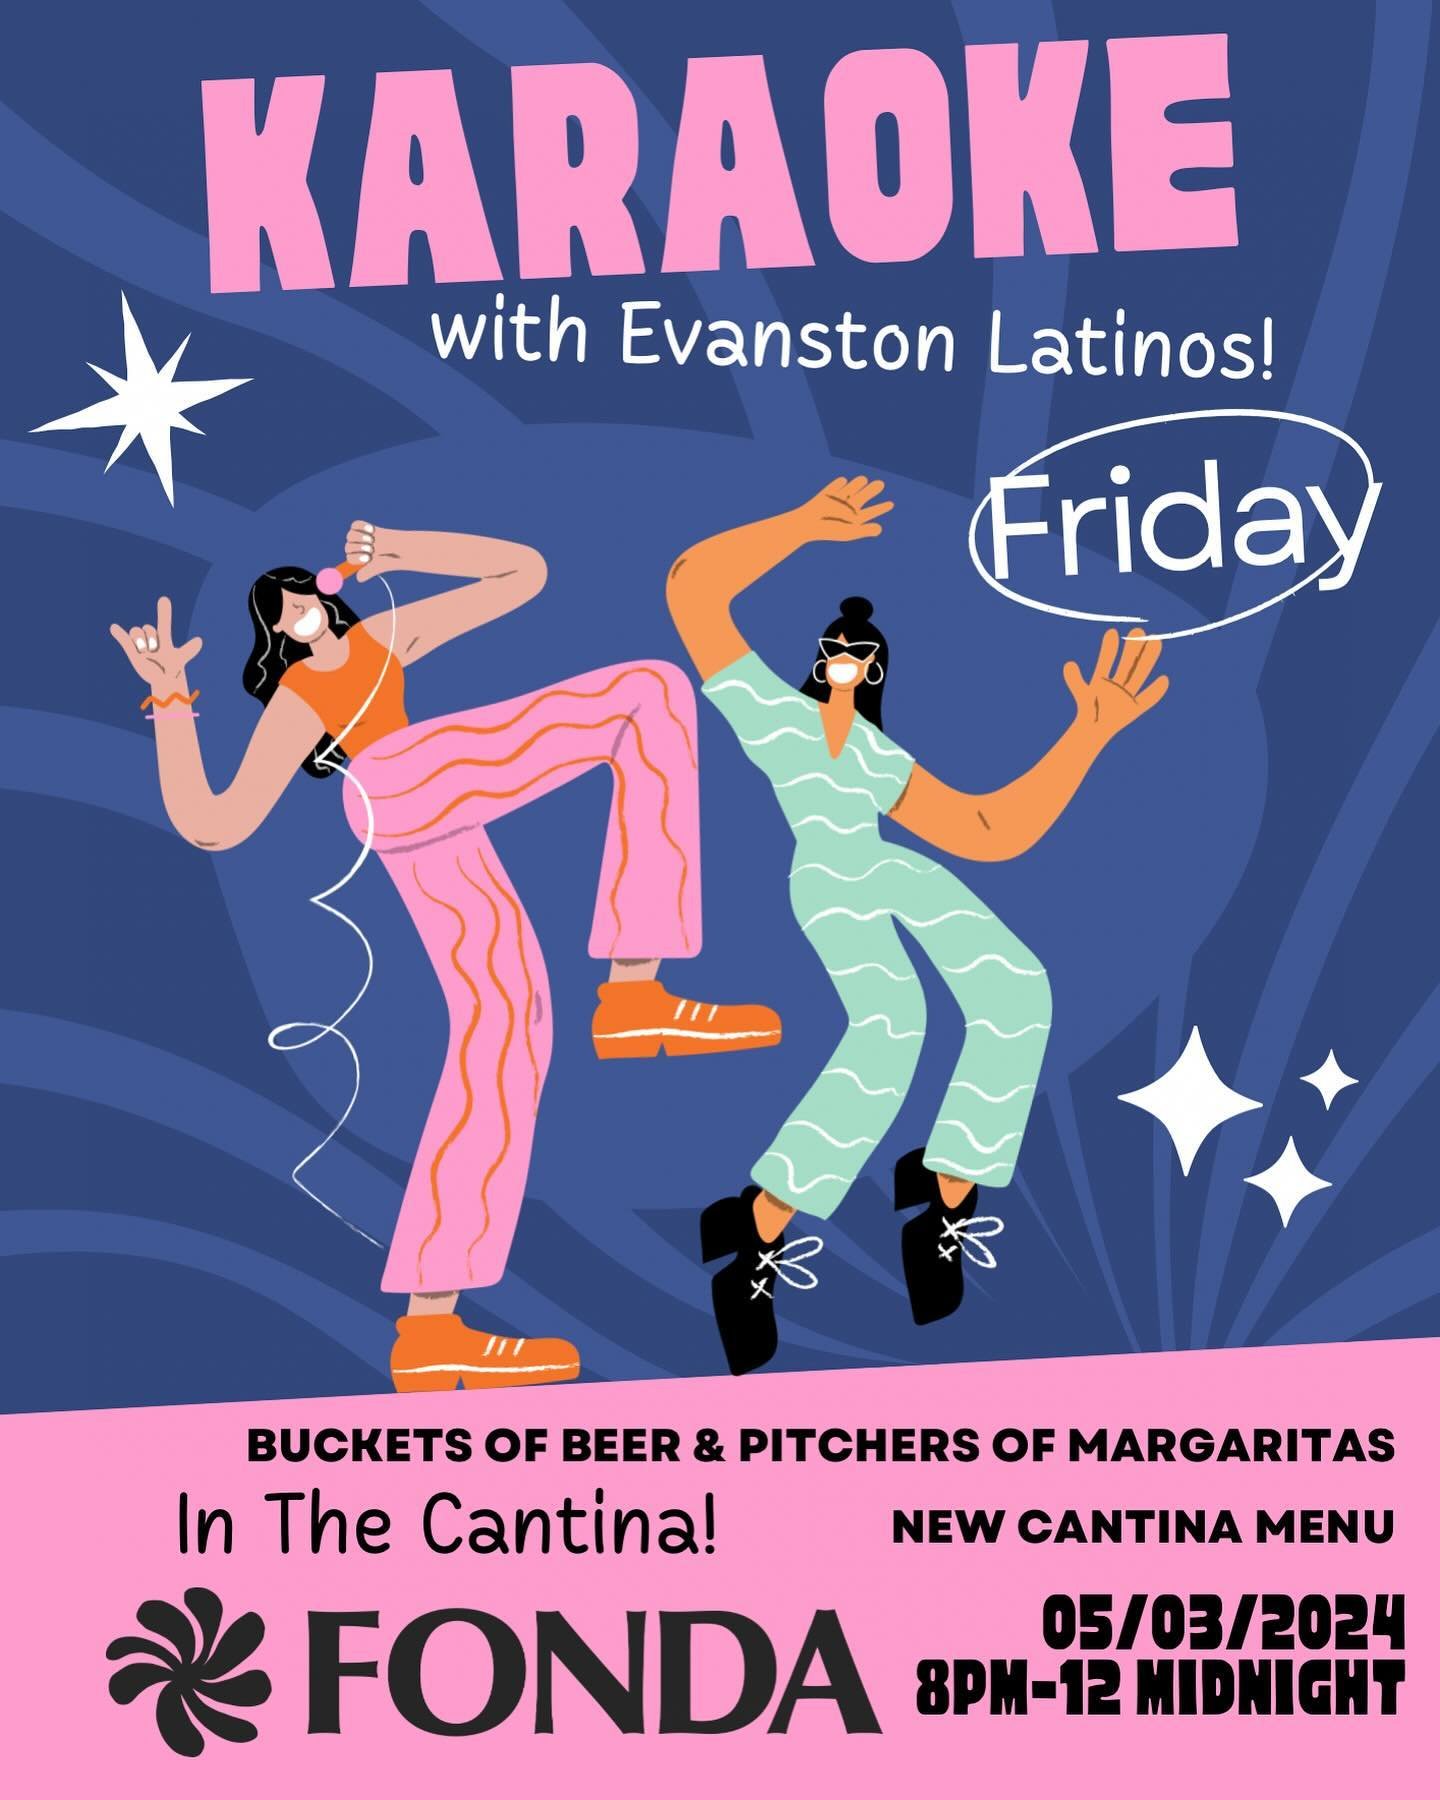 Join us for FUN FRIDAY!!! Karaoke and NEW ~ Buckets of Beer &amp; Pitchers of Margaritas!!!! Only in the Cantina with @evanstonlatinos !!!!! #bethere #joinus #sing #karaoke🎤 #bucketsofbeer #pitchersofmargs #fonda #fondacantina